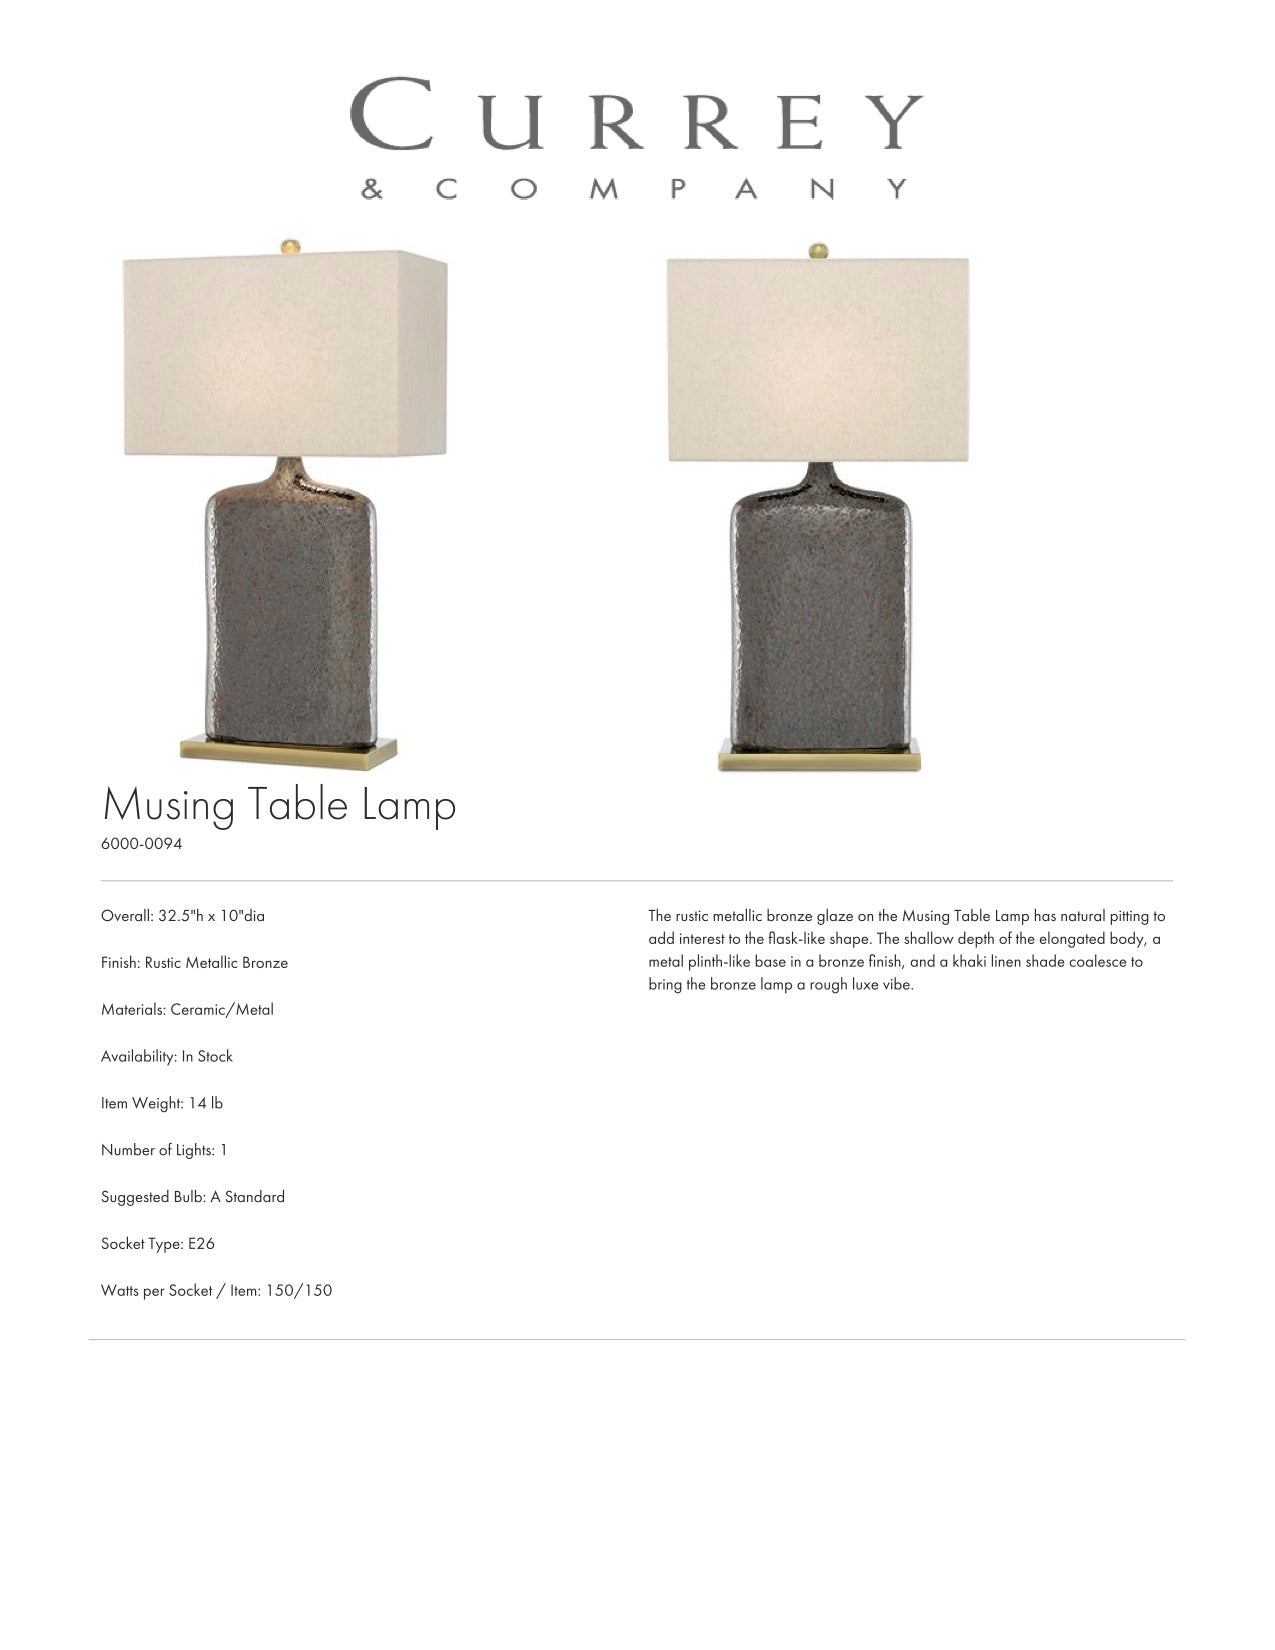 Currey & Company Musing Table Lamp Tearsheet